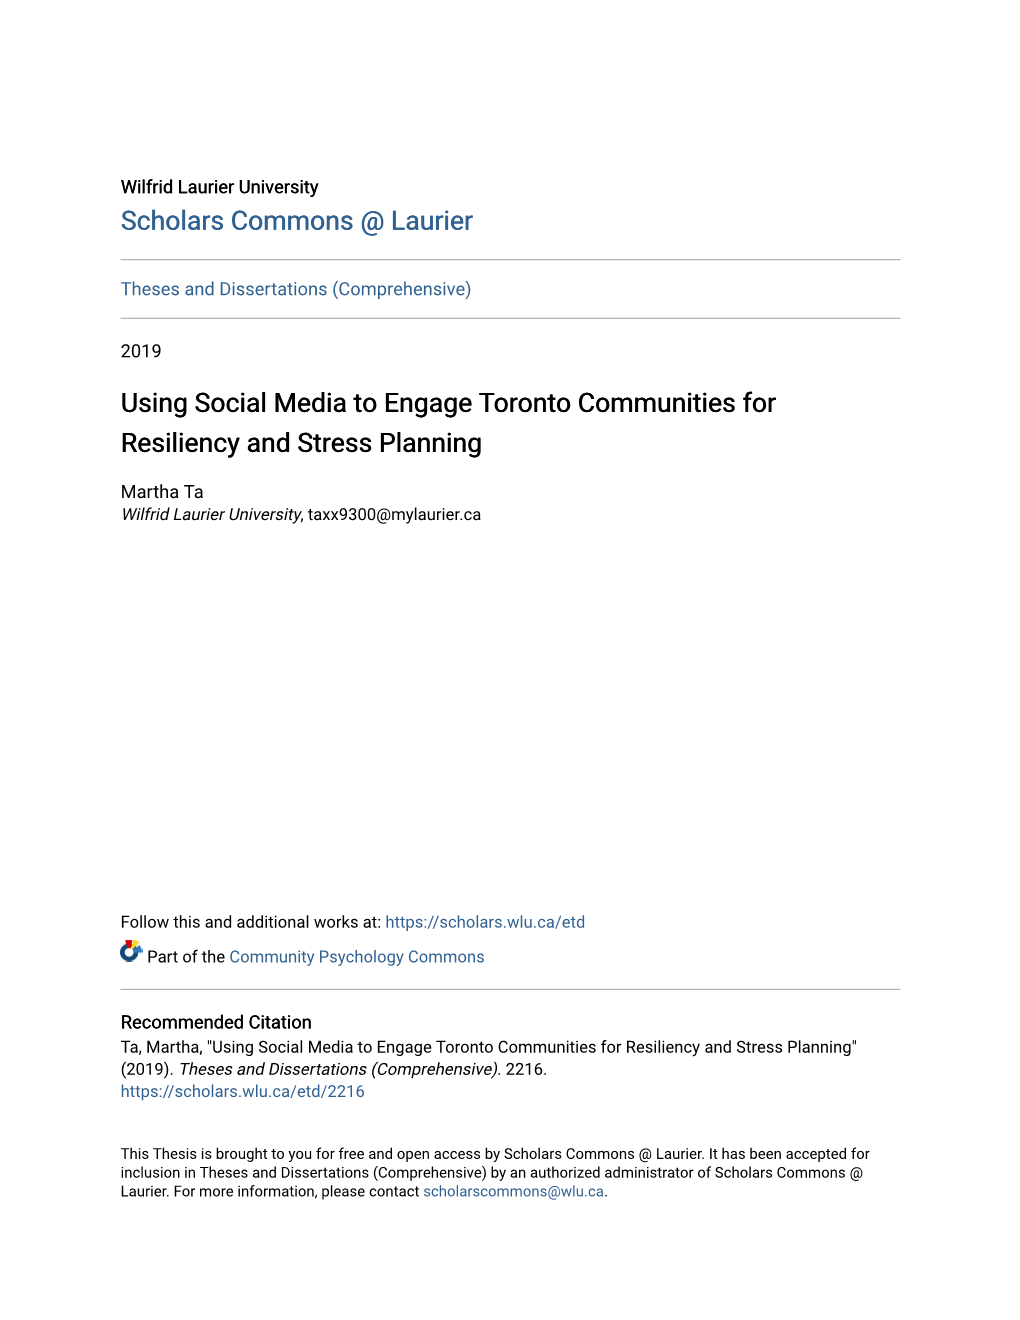 Using Social Media to Engage Toronto Communities for Resiliency and Stress Planning